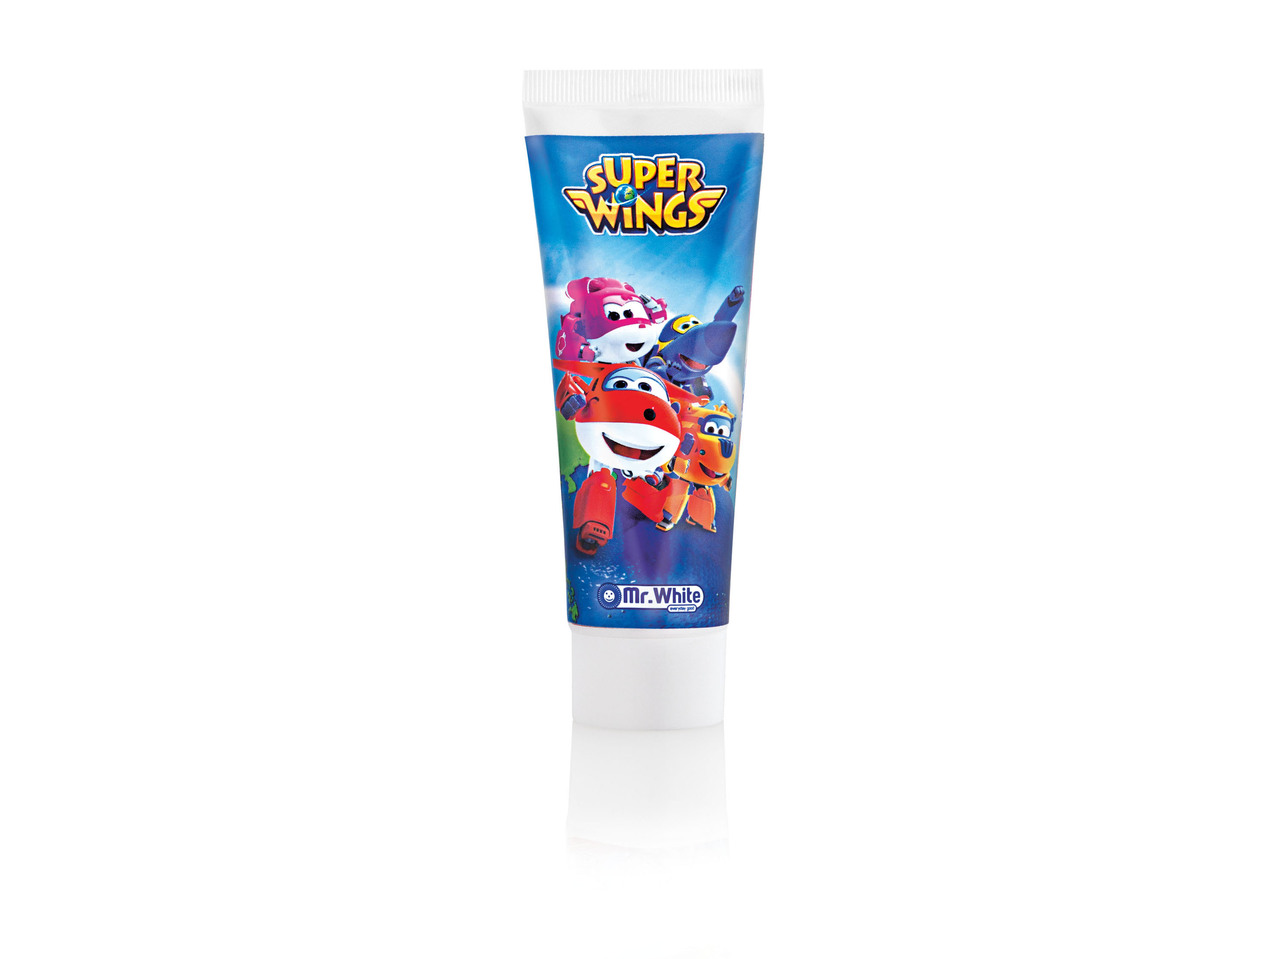 "Super Wings" or "Winx" Toothpaste